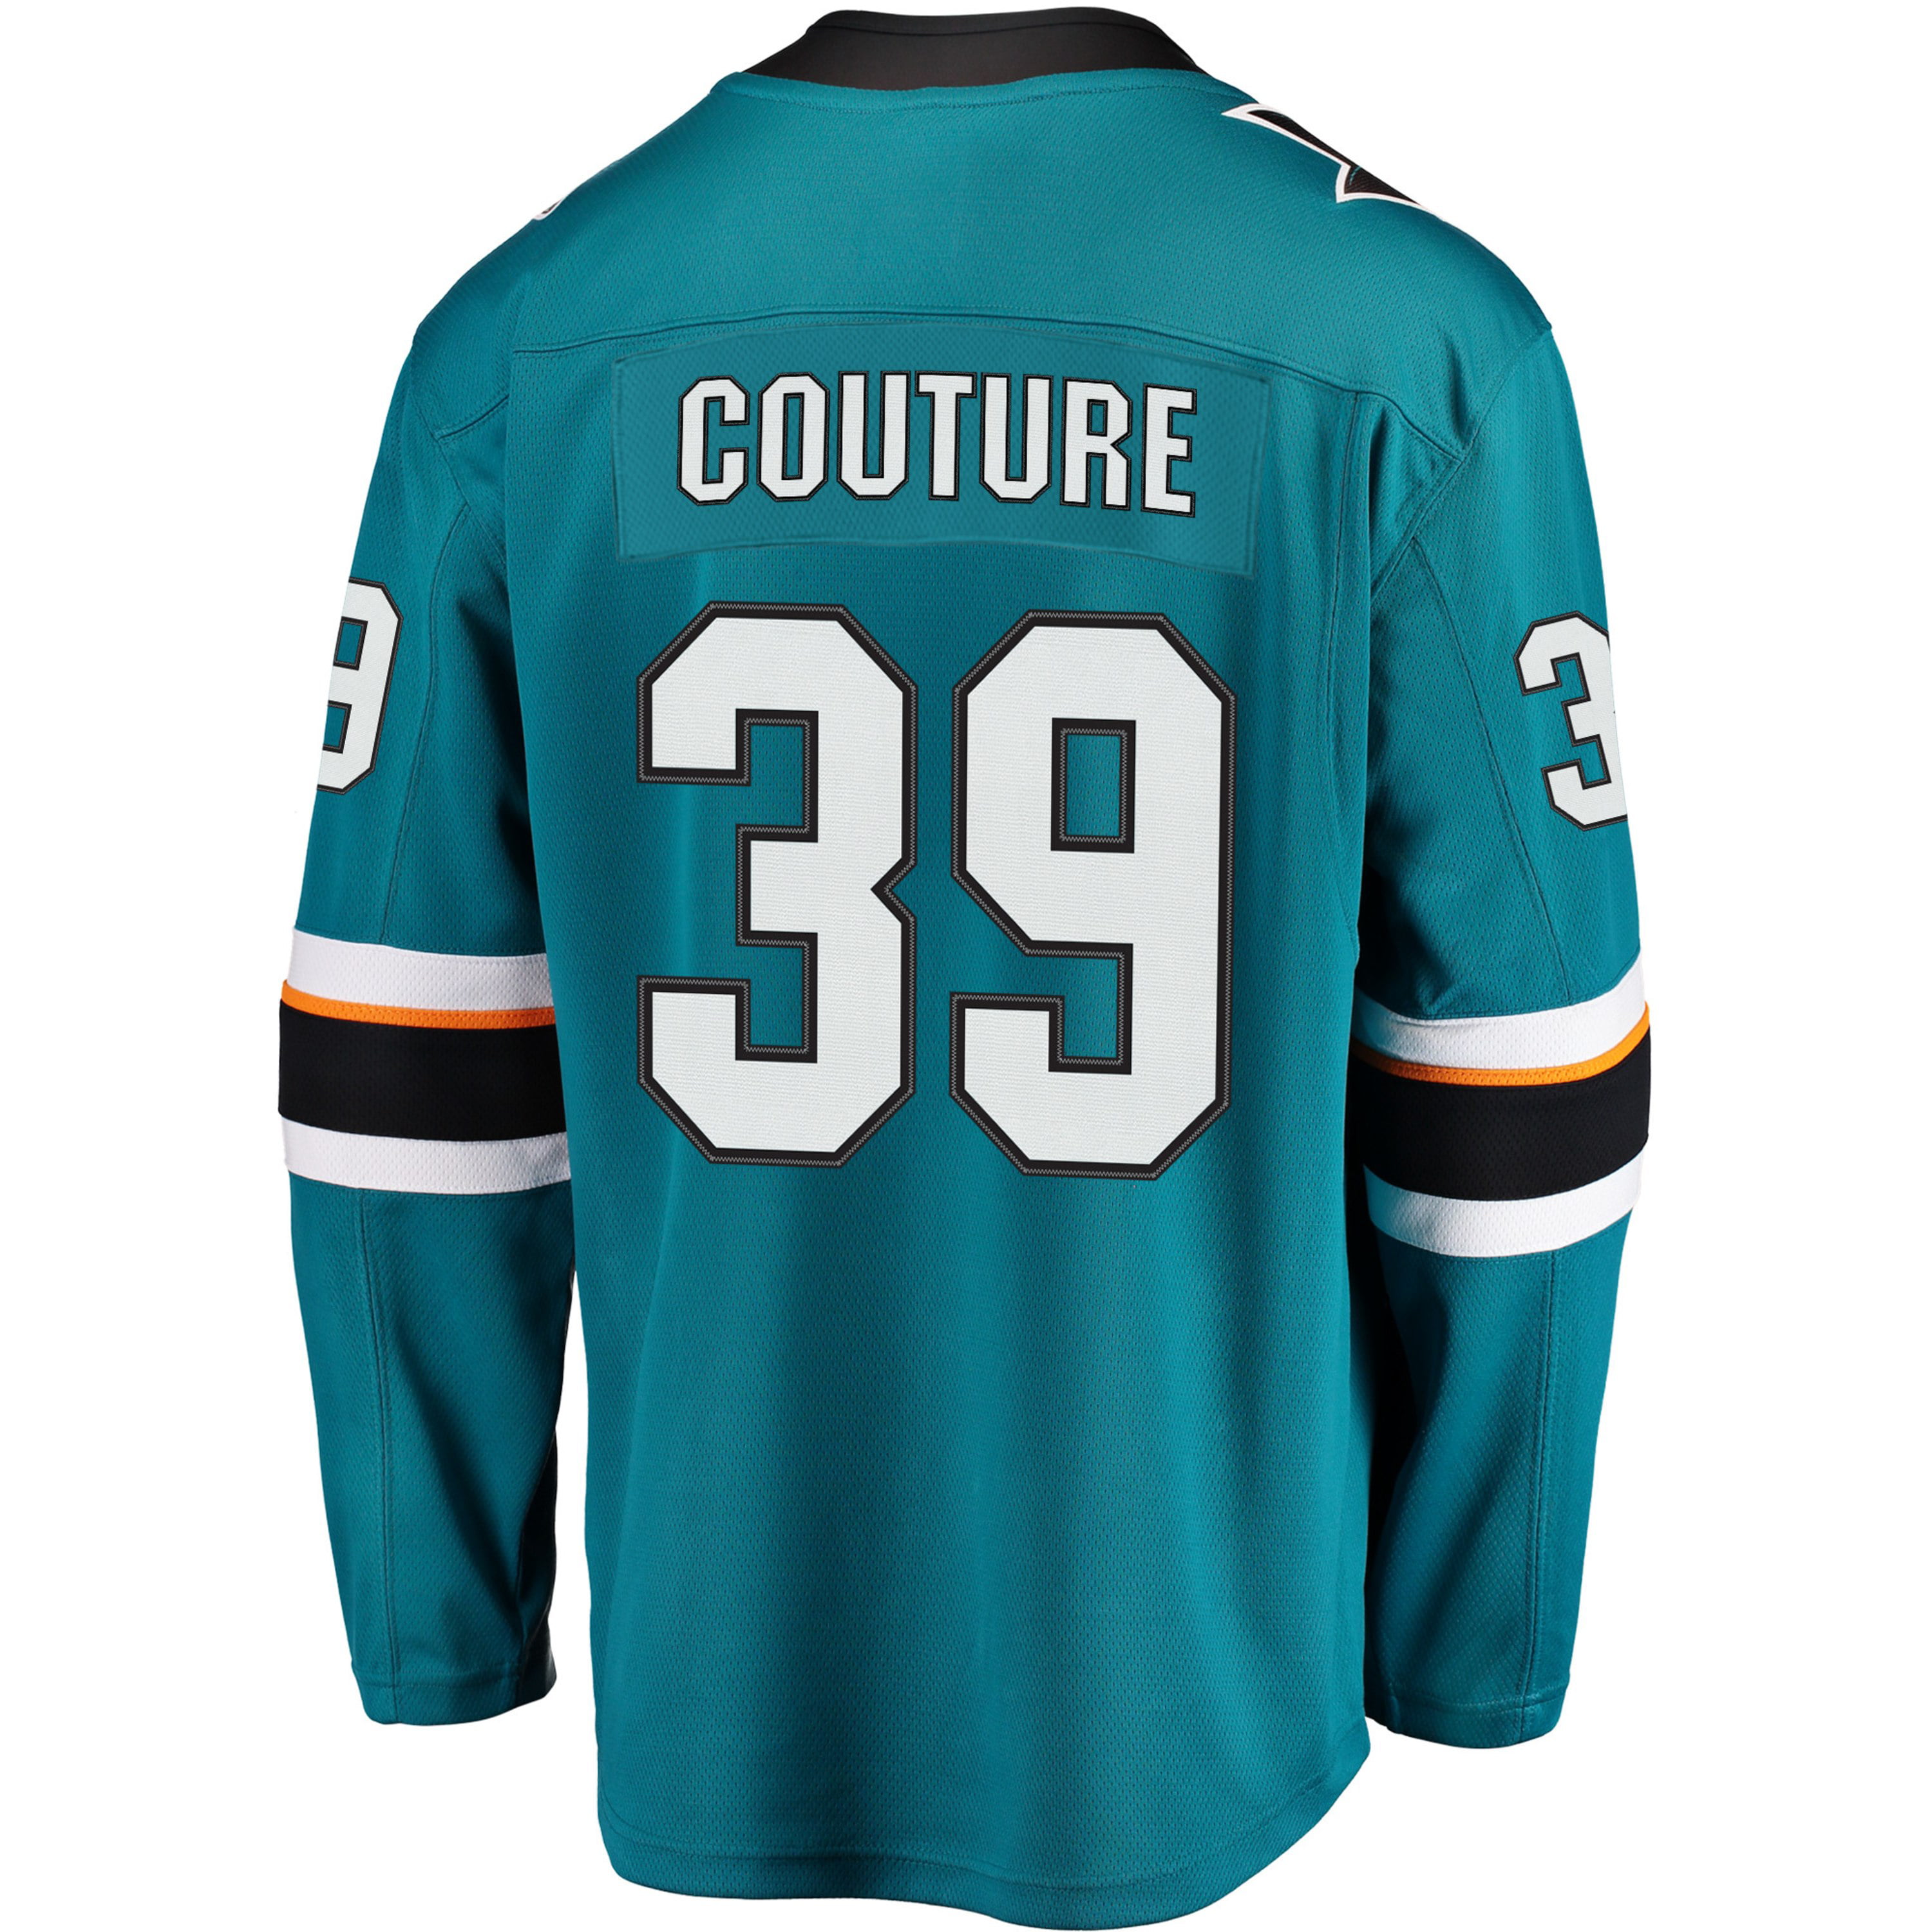 sharks couture jersey